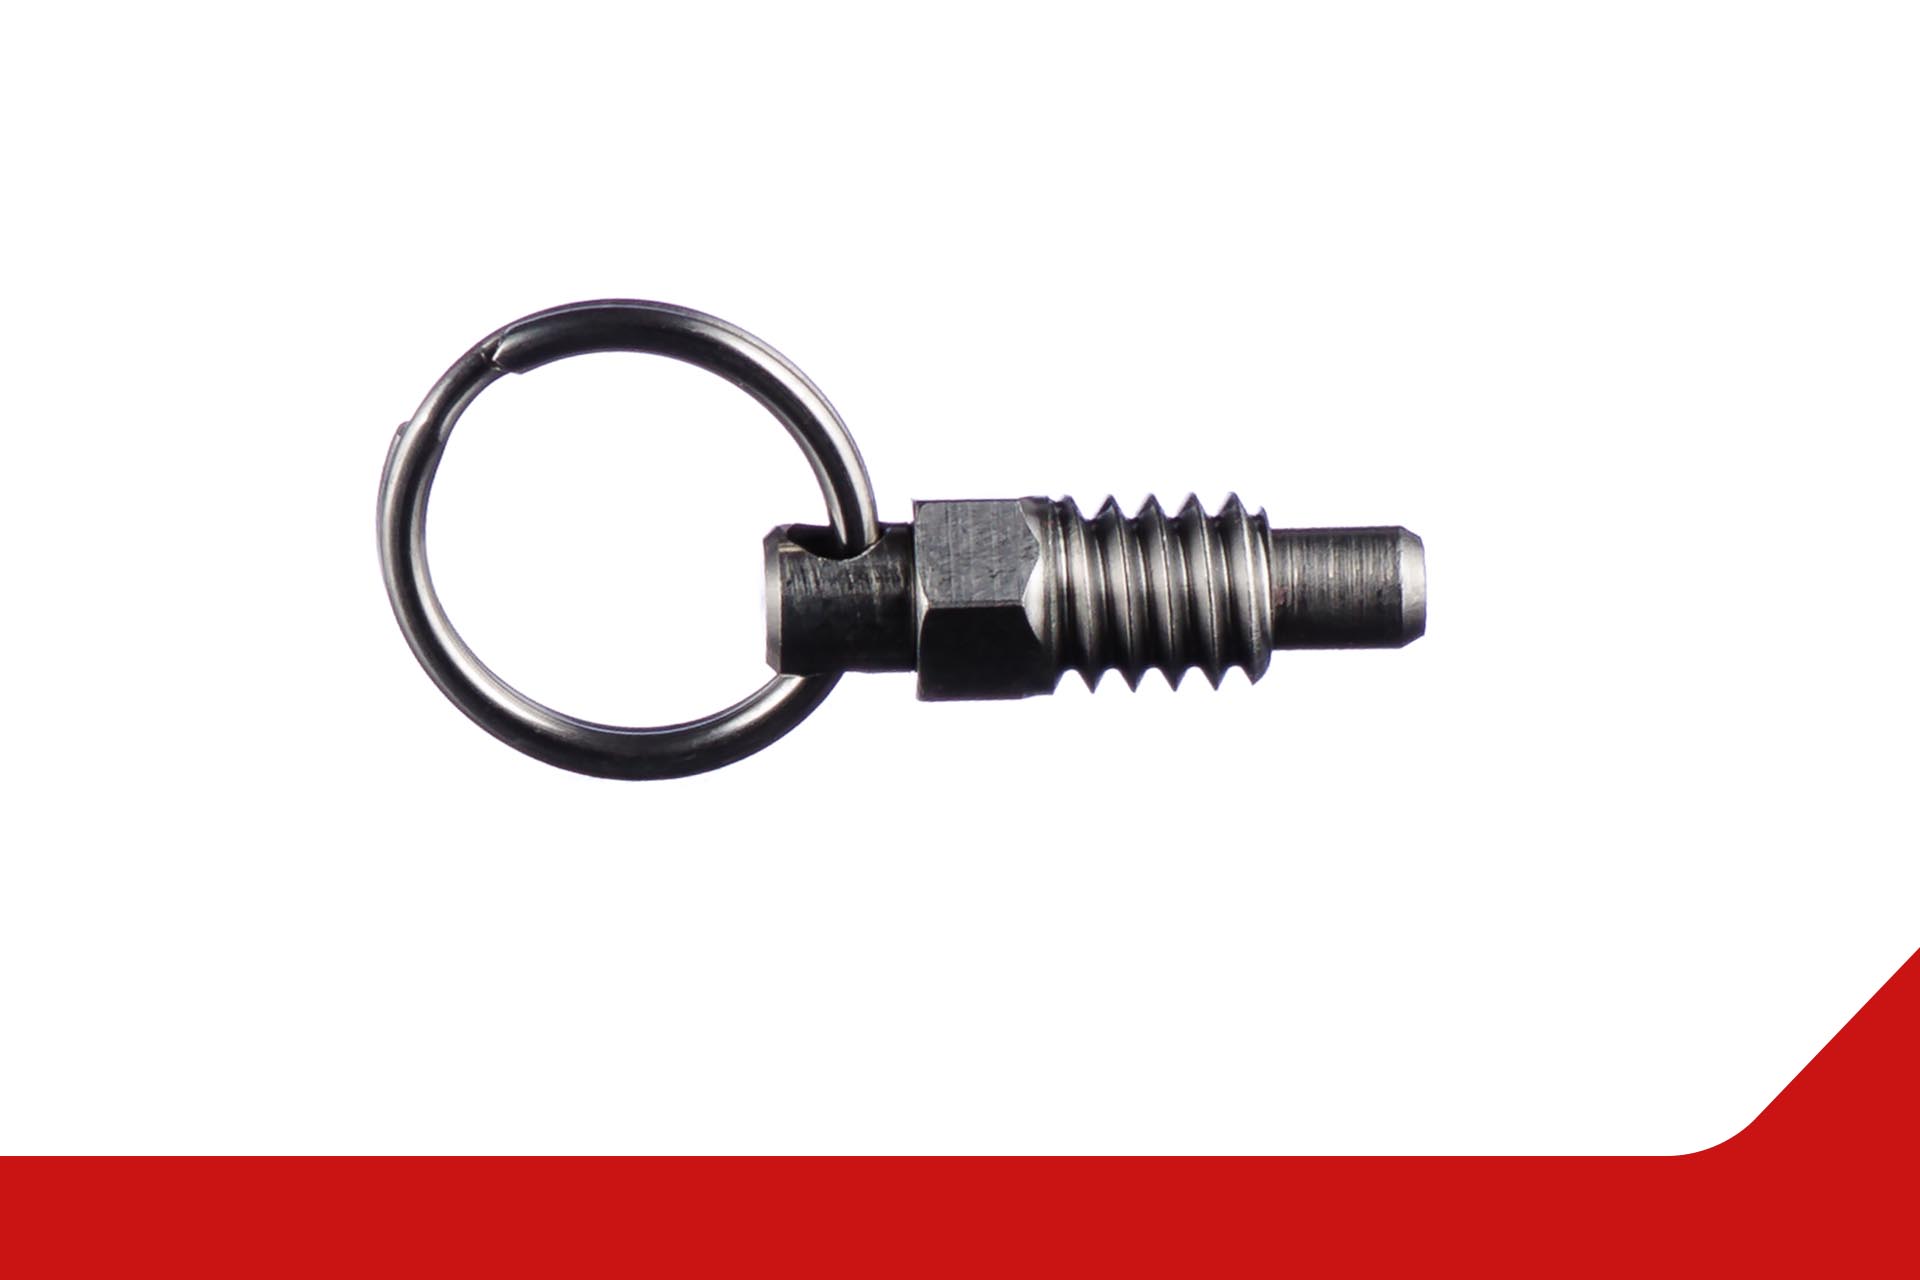 Picture of a Vlier stubby pull ring plunger for blog discussing the top 5 reasons to use a quick release device.